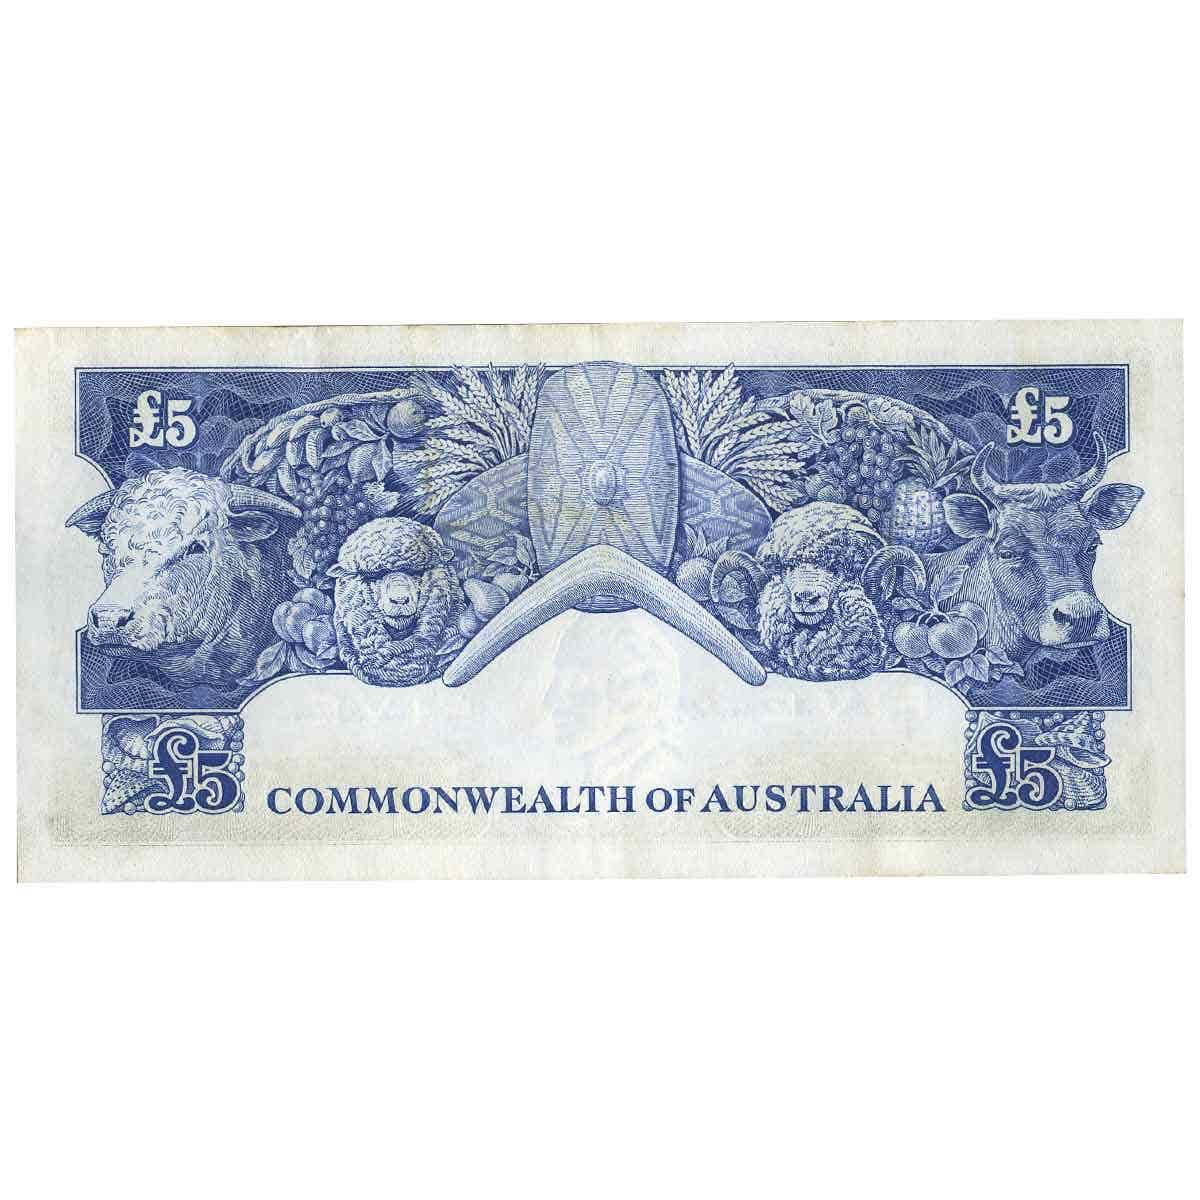 1954 £5 R49 Coombs/Wilson Commonwealth Bank Banknote Uncirculated